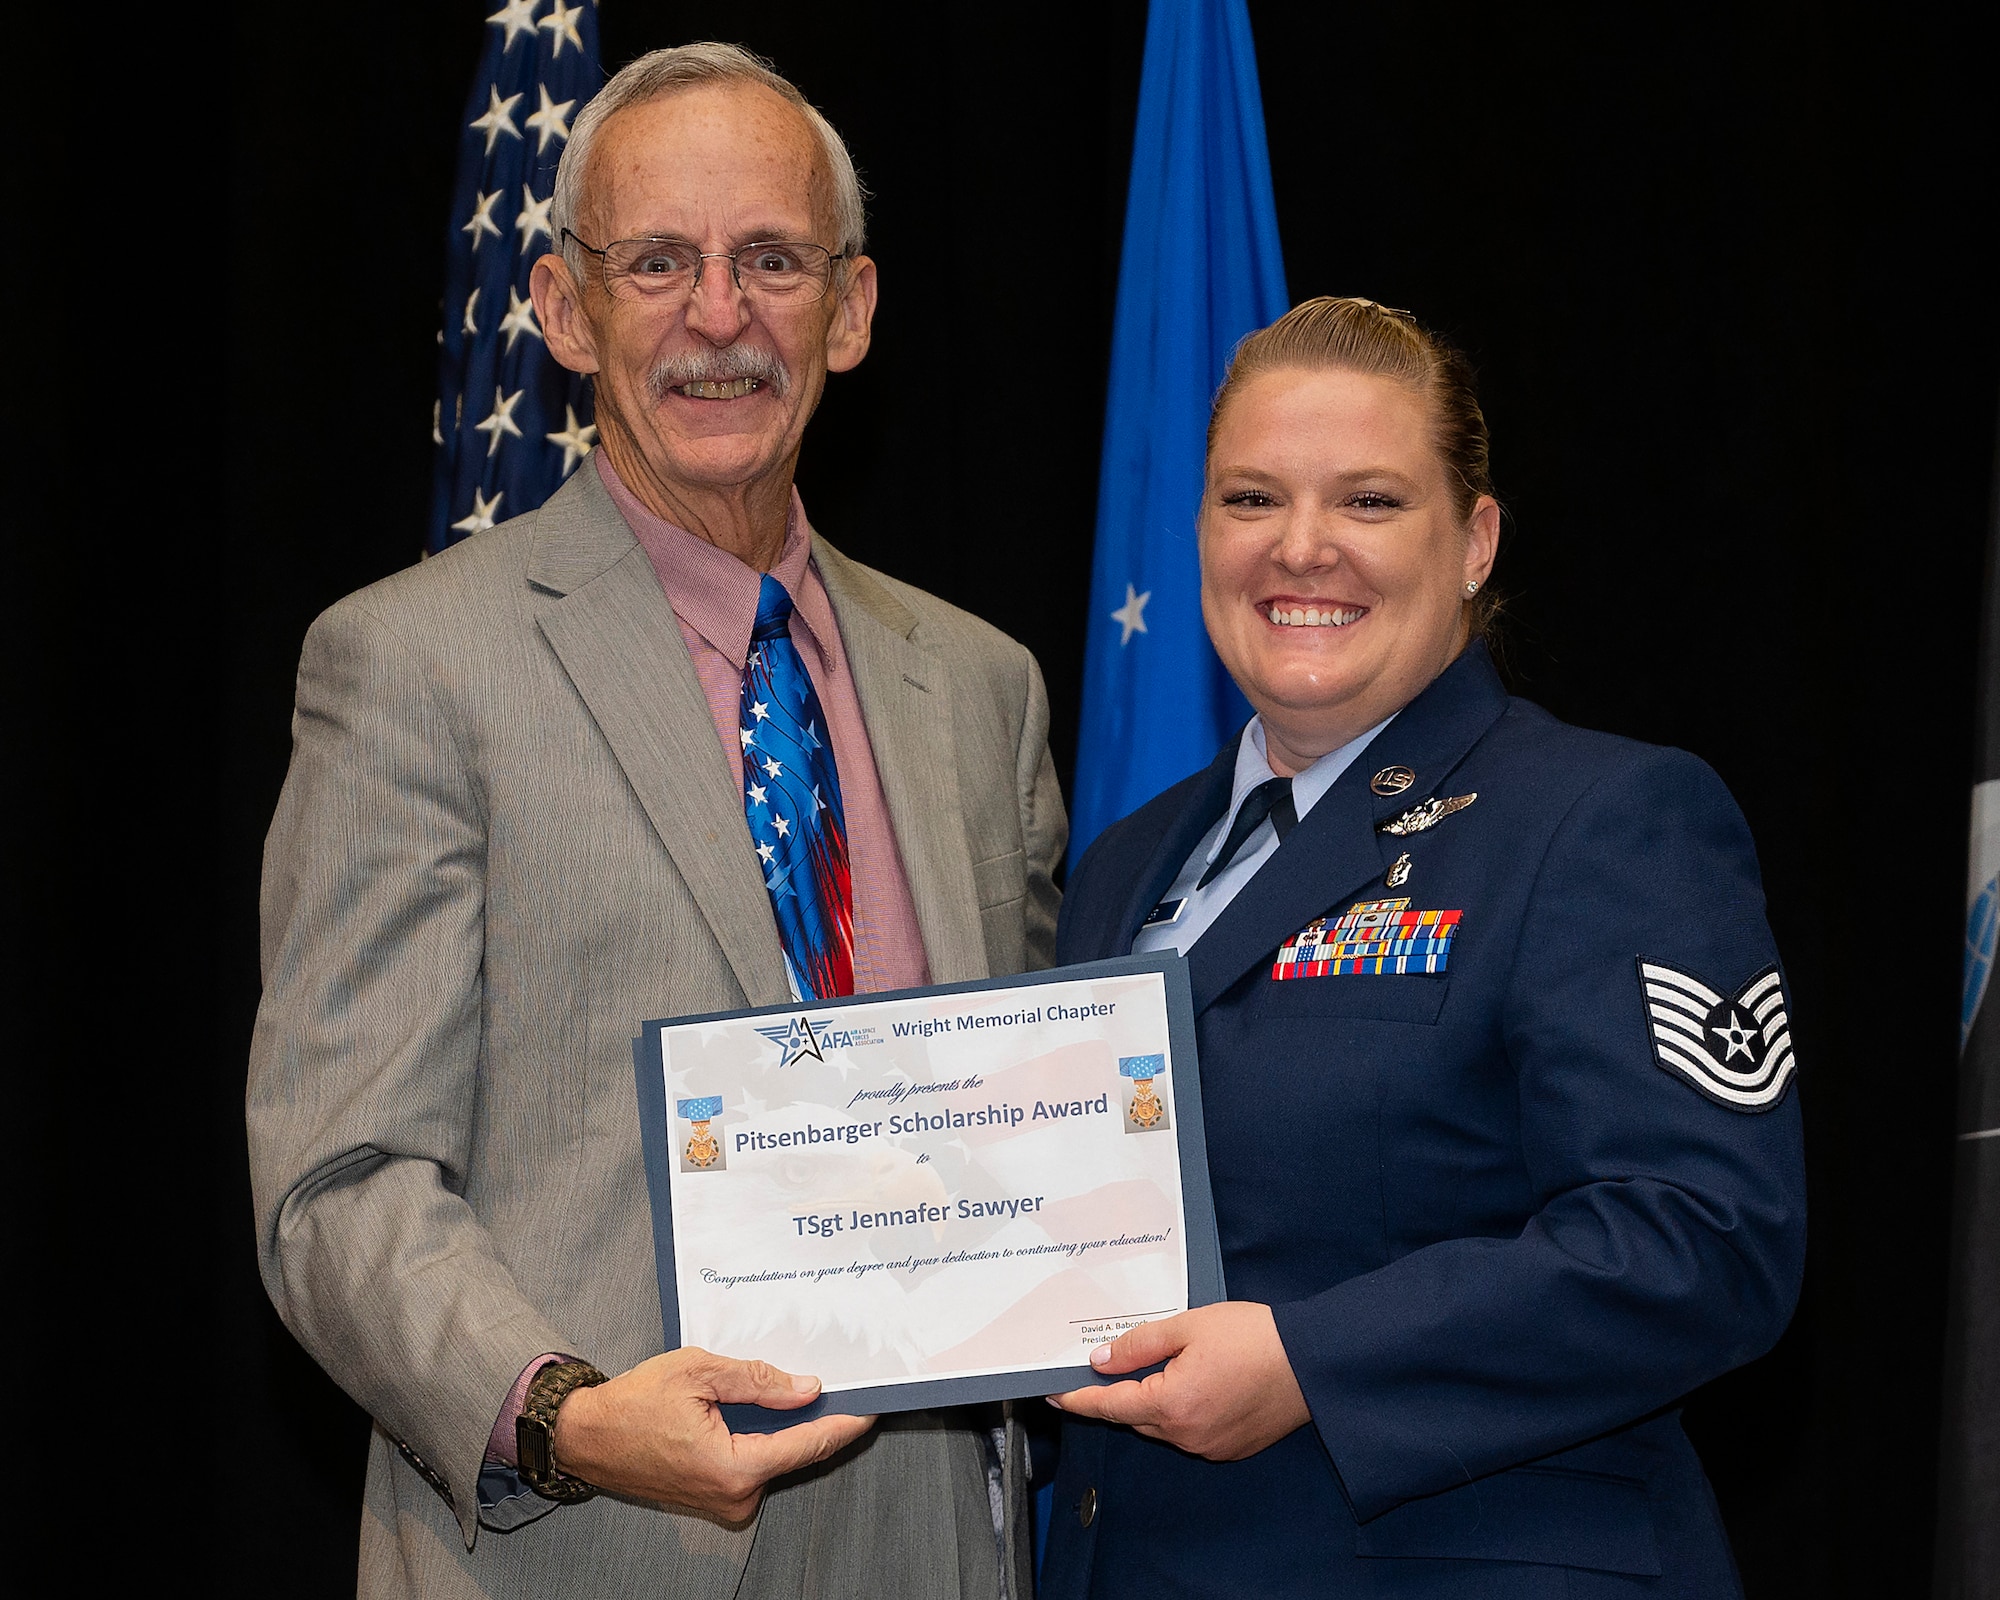 Tech Sgt. Jennafer Sawyer receives the Pitsenbarger Scholarship June 15, 2022, from Air and Space Forces Association Wright Memorial Chapter during the Community College of the Air Force Spring 2022 graduation ceremony at the National Museum of the Air Force, Wright-Patterson Air Force Base, Ohio. The scholarship is a cash award to be used in the continuation of education beyond the associate degree level. (U.S. Air Force photo by R. J. Oriez)